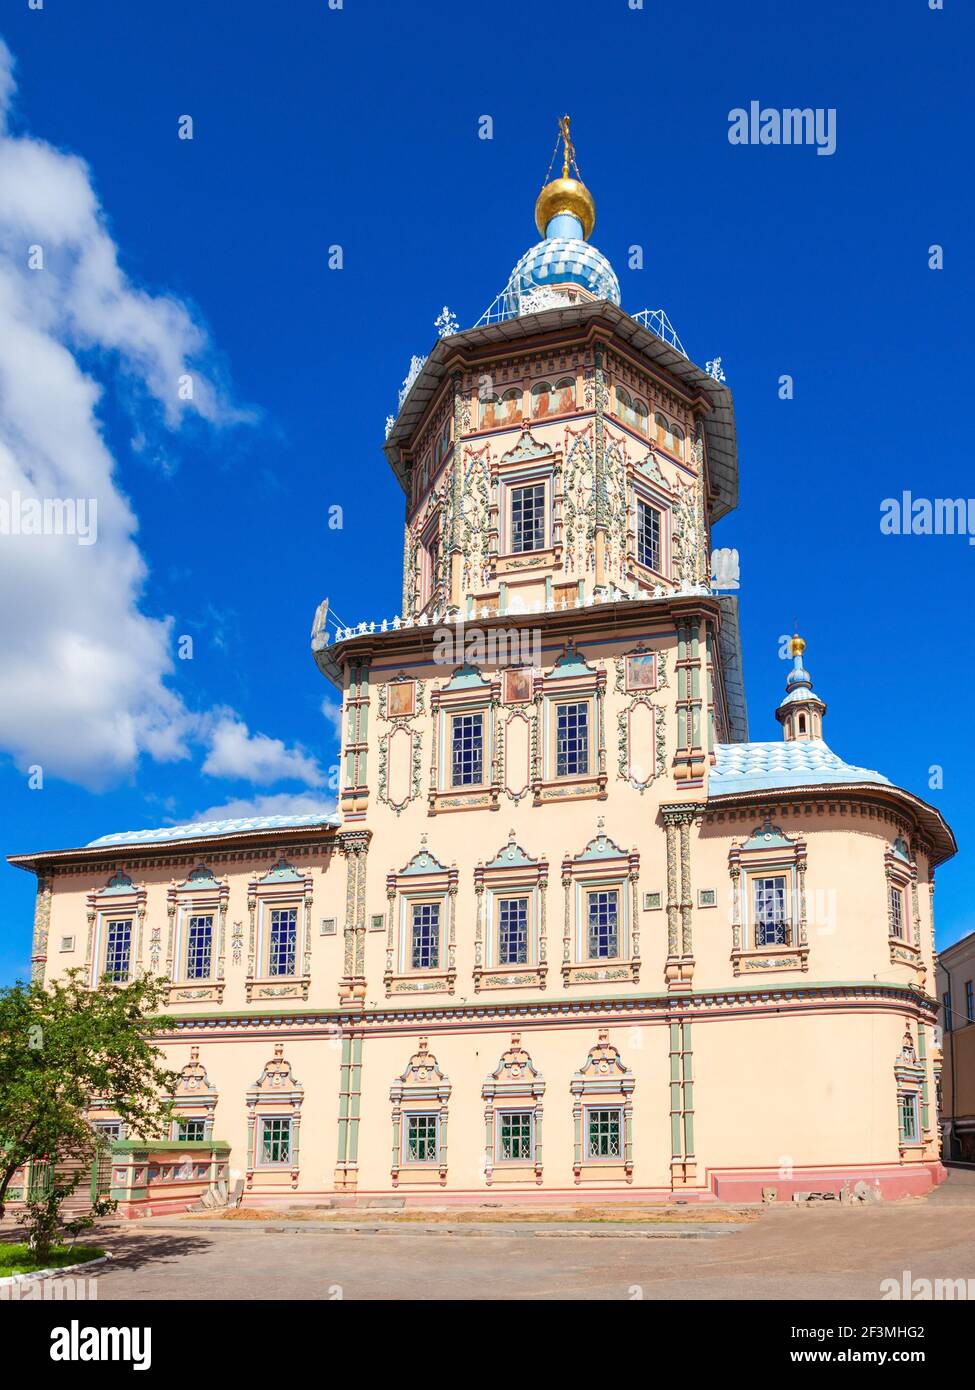 Cathedral of the Saint Apostles Peter and Paul or Petropavlovsky Cathedral is a Russian Orthodox church in Kazan, Tatarstan republic of Russia. Stock Photo